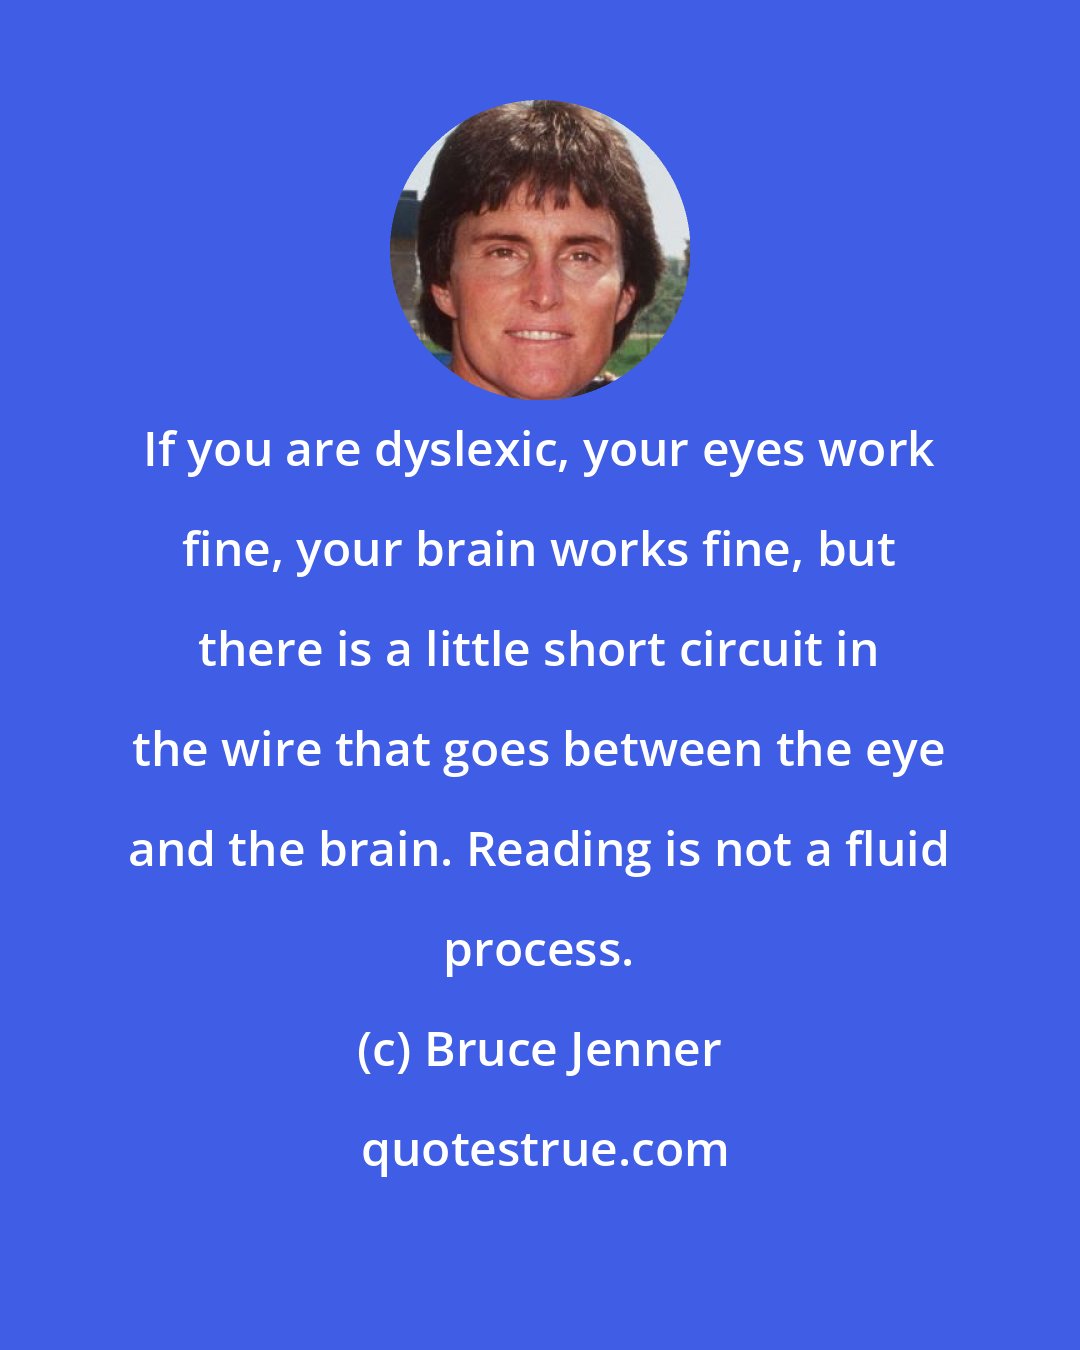 Bruce Jenner: If you are dyslexic, your eyes work fine, your brain works fine, but there is a little short circuit in the wire that goes between the eye and the brain. Reading is not a fluid process.